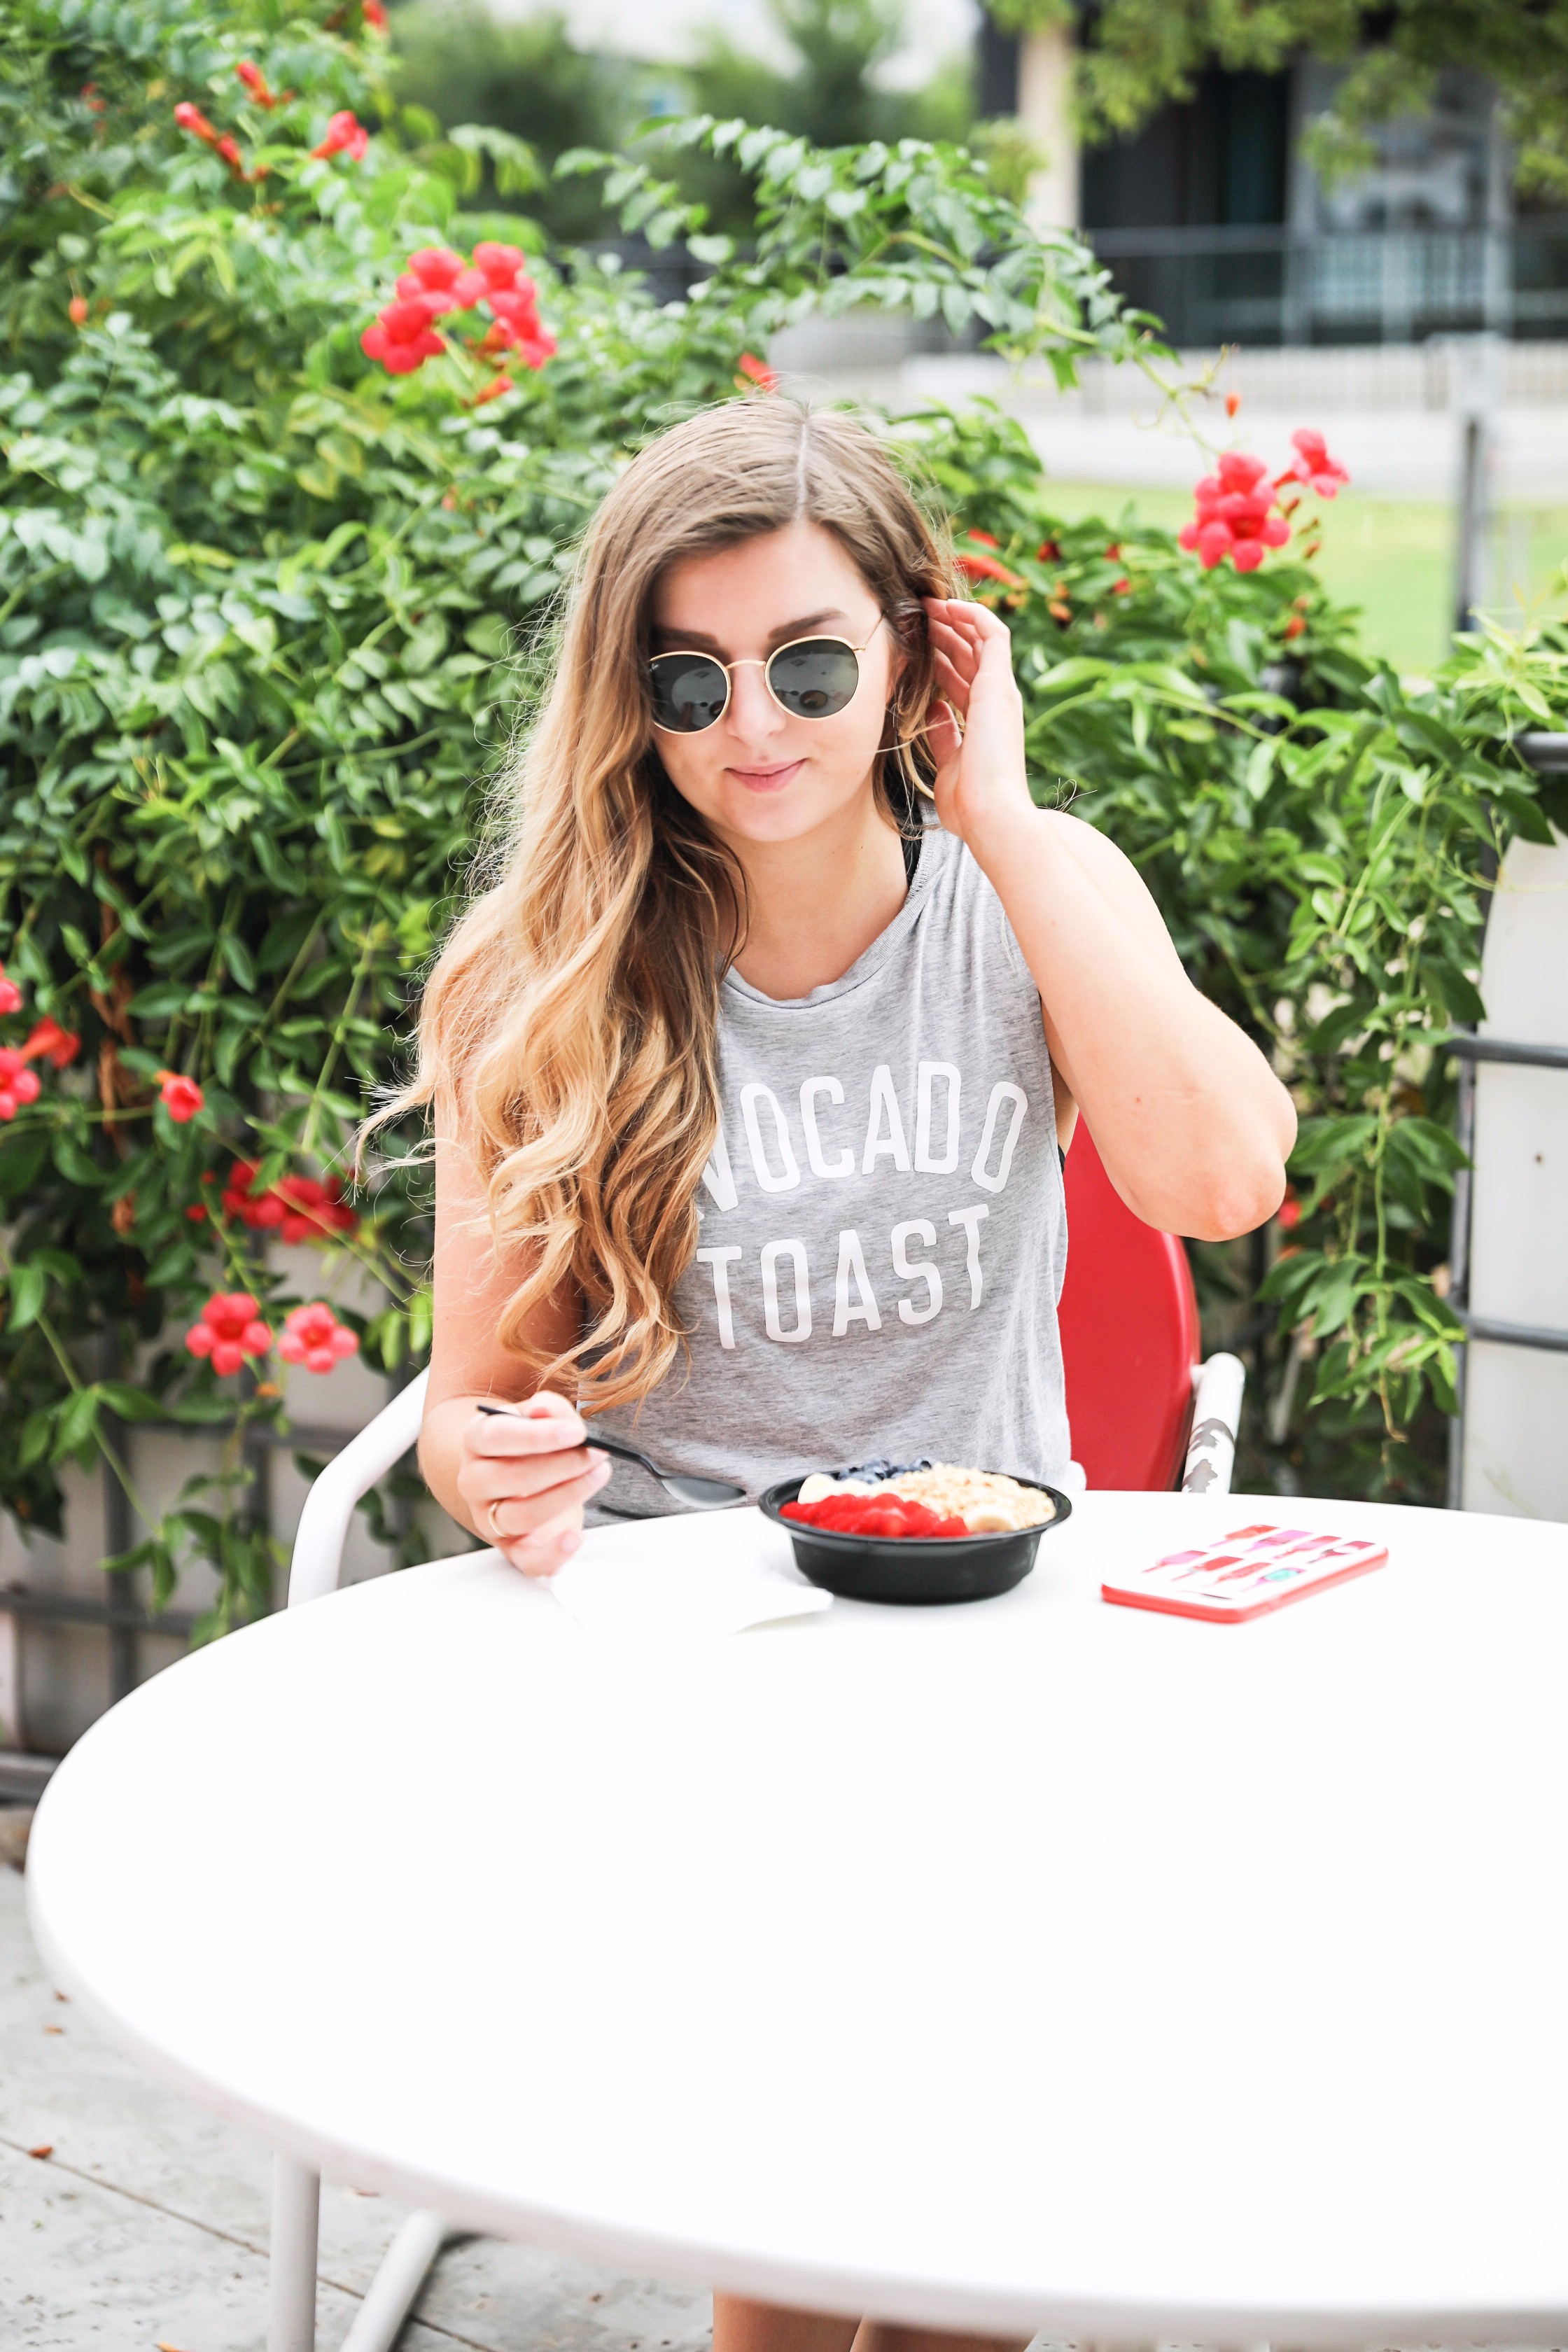 The best acai bowls, shots, and smoothies in oklahoma city! Wheeze the Juice okc meals. I am wearing the cutest avocado toast tank! By fashion blogger daily dose of charm lauren lindmar